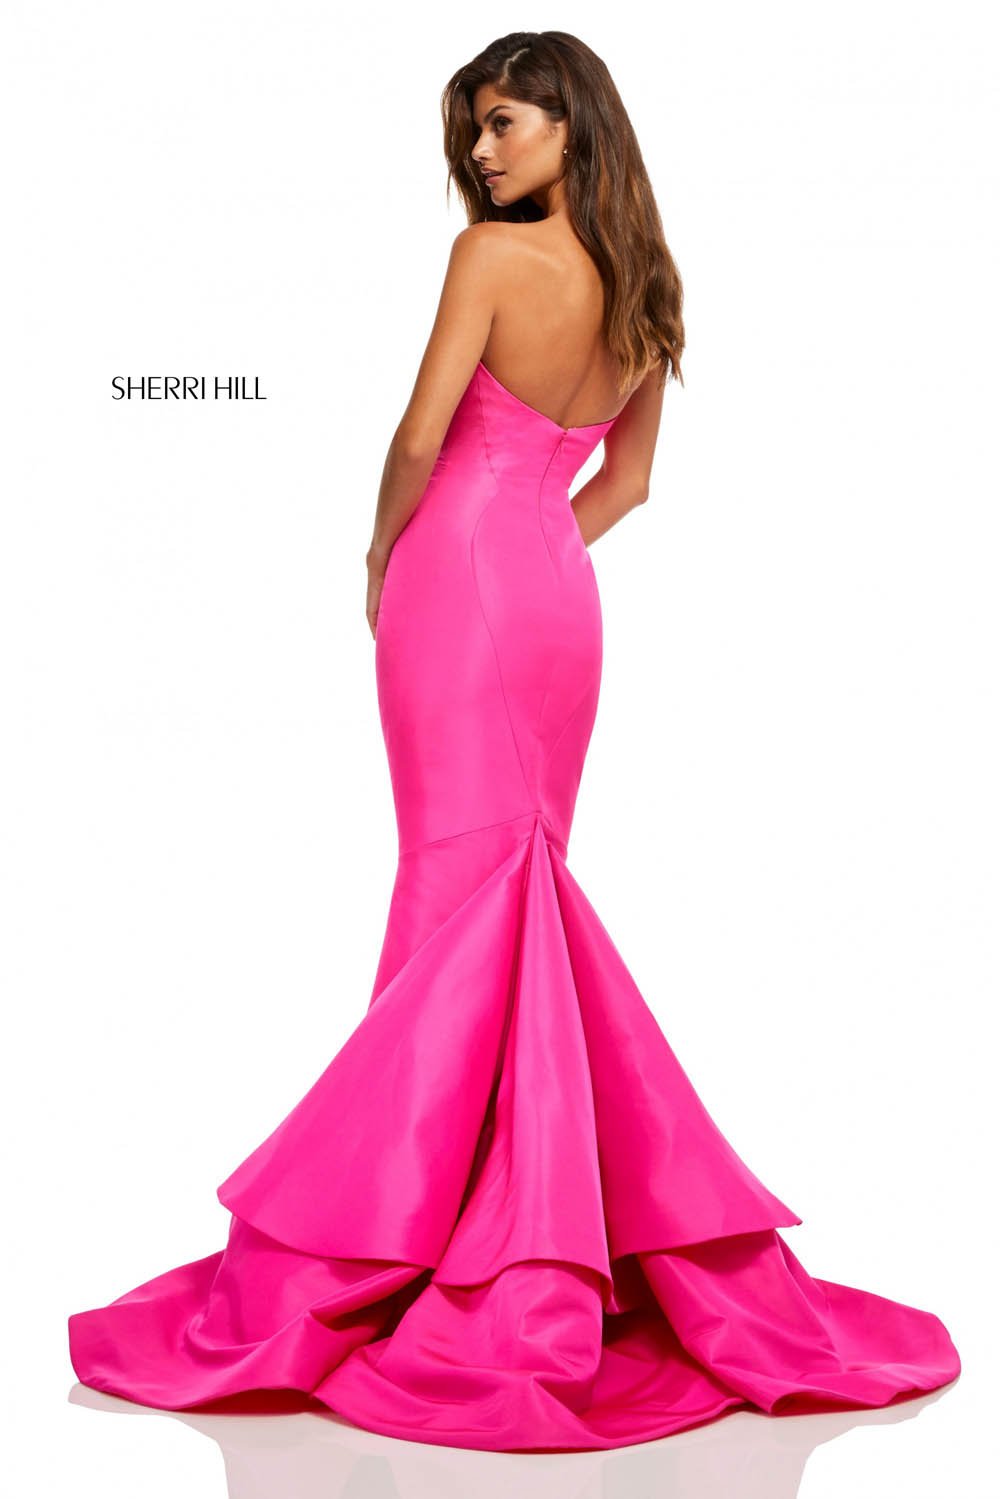 Sherri Hill 52601 dress images in these colors: Emerald, Navy, Red, Yellow, Bright Pink, Light Blue, Orange.